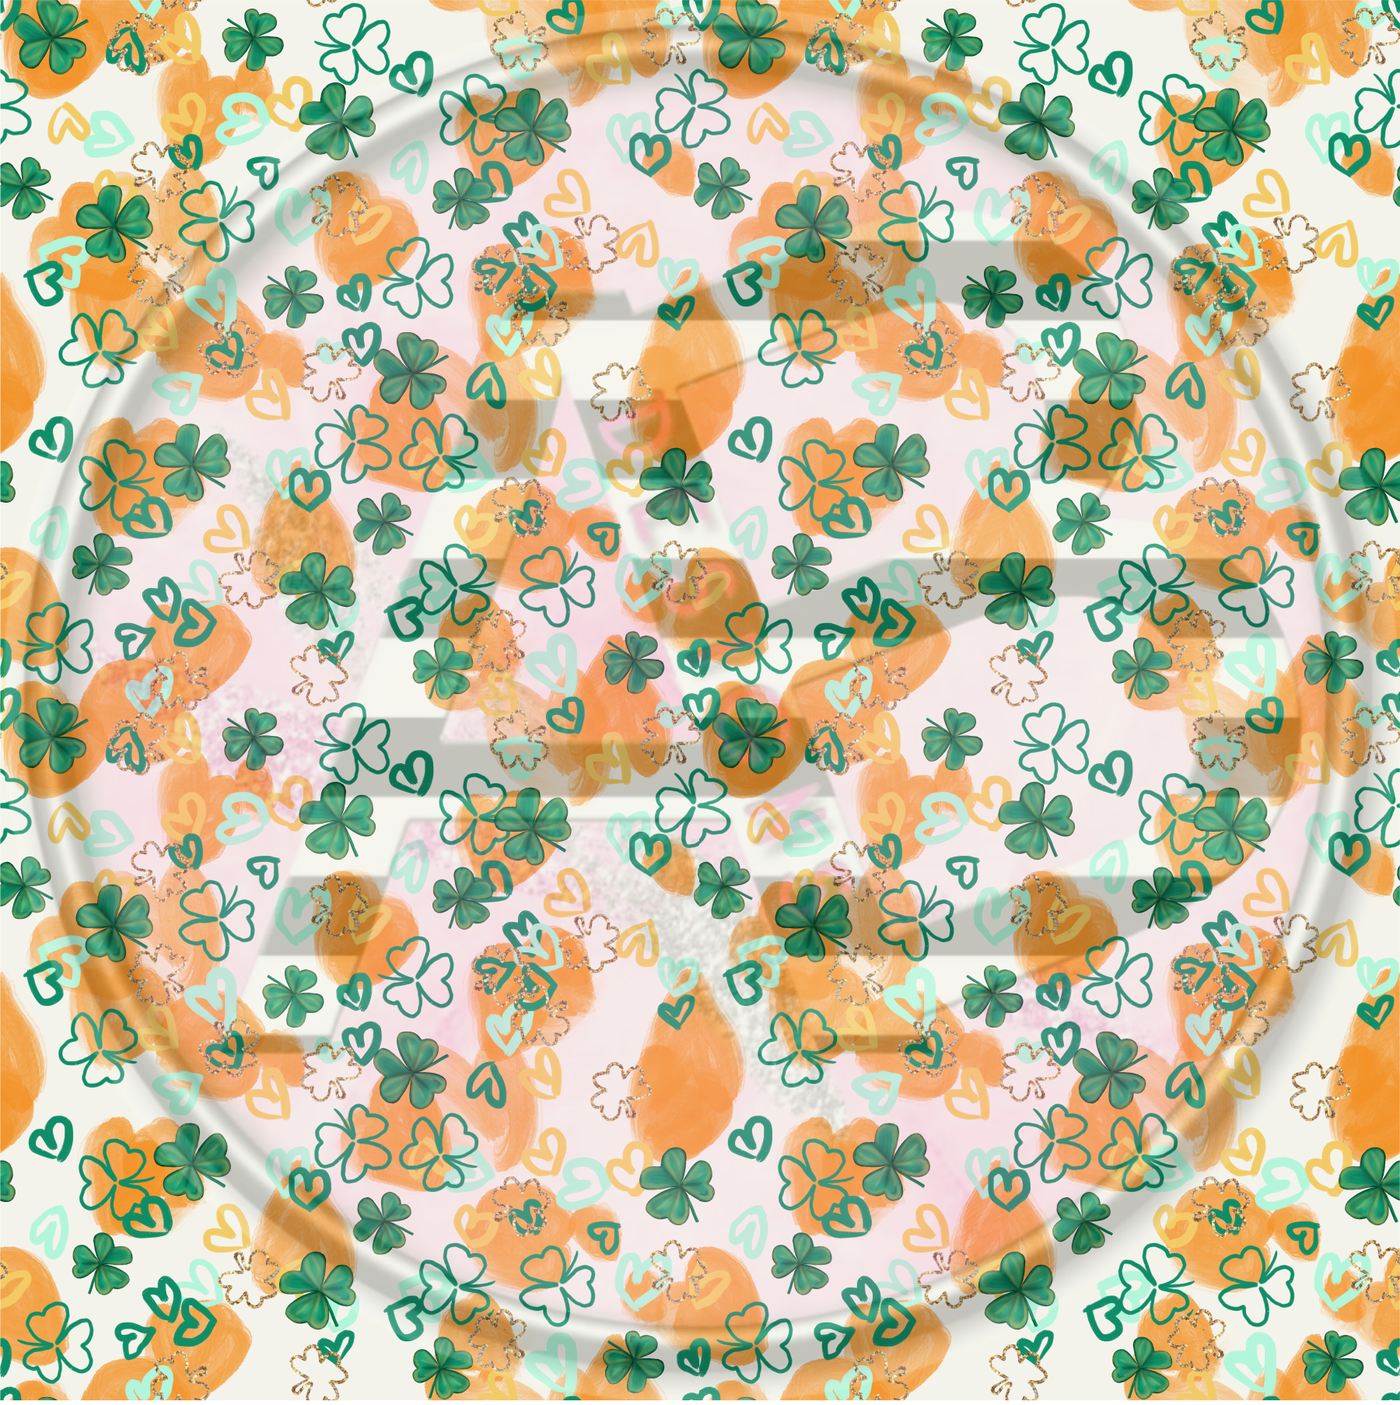 Adhesive Patterned Vinyl - St. Patrick's Day 06 SMALLER